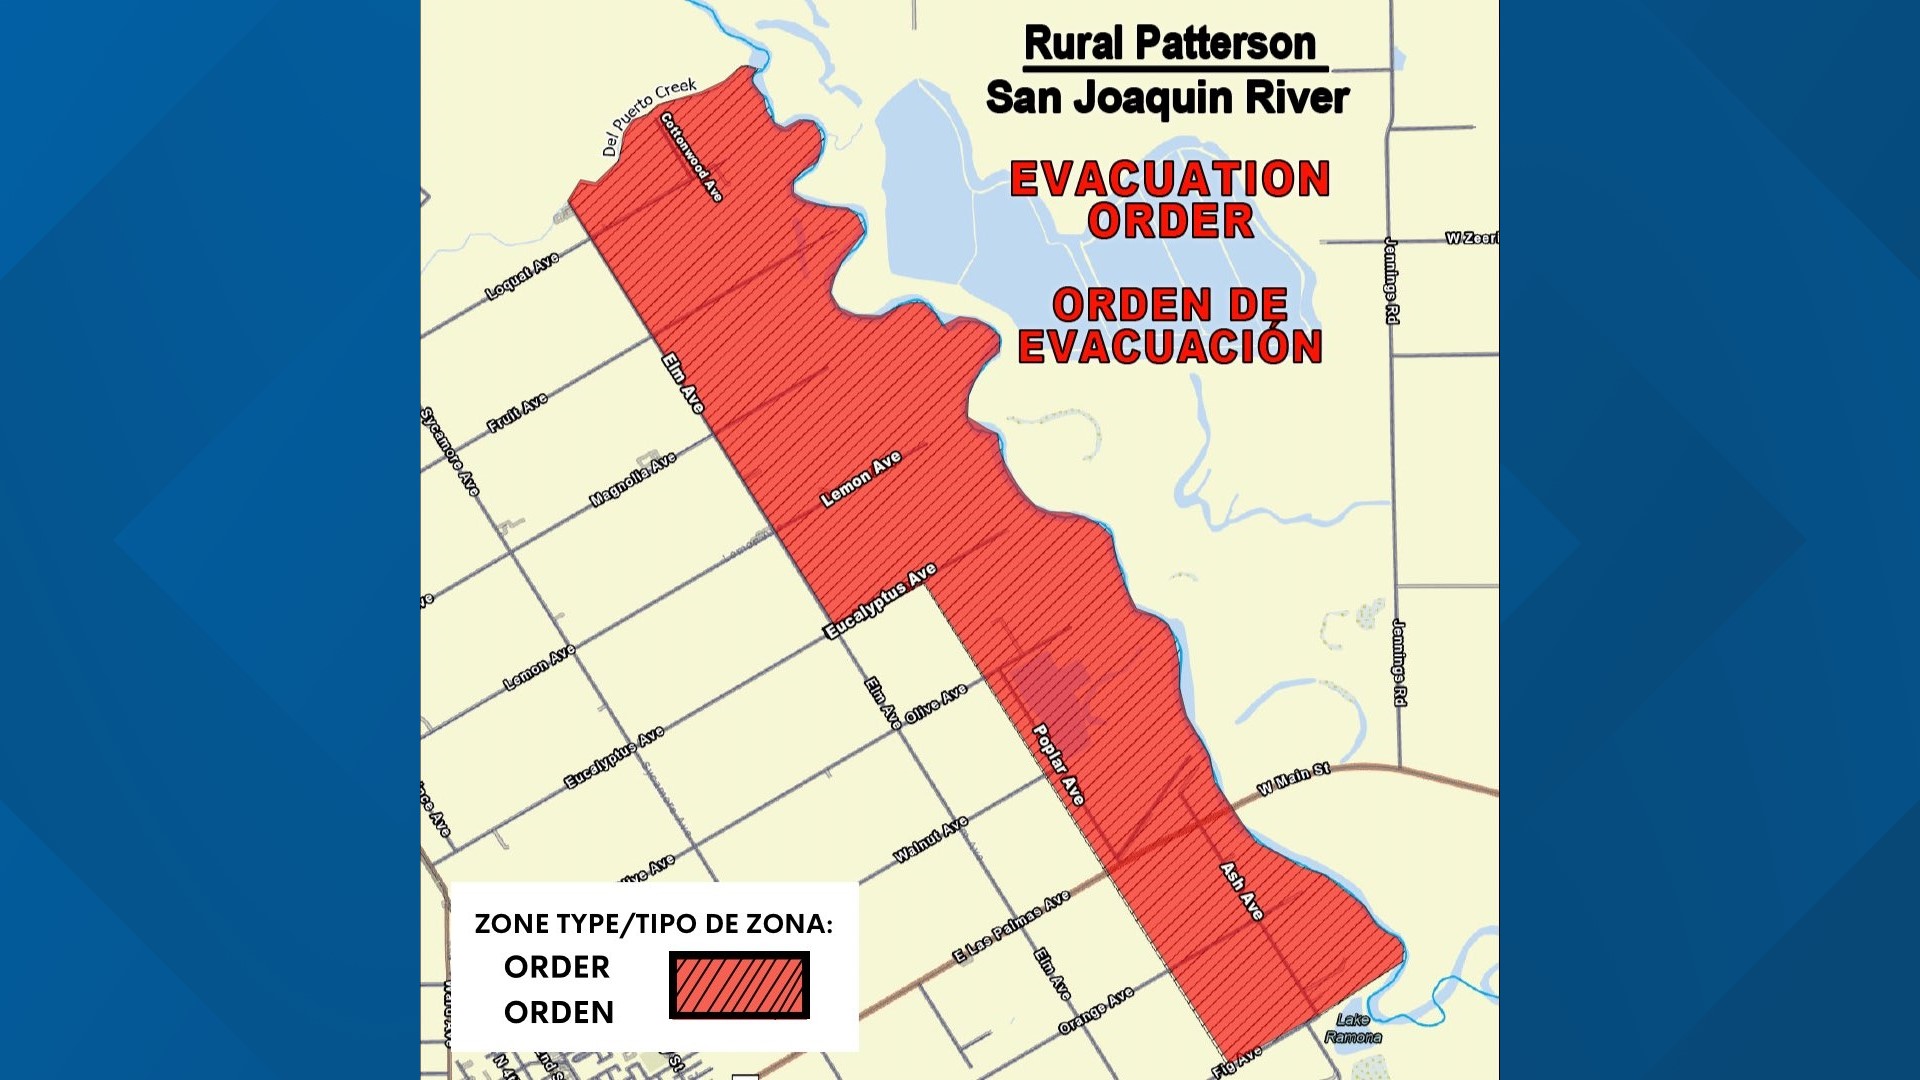 A water gauge located near the evacuation warning zone predicts the San Joaquin River will reach action stage in the area by Monday